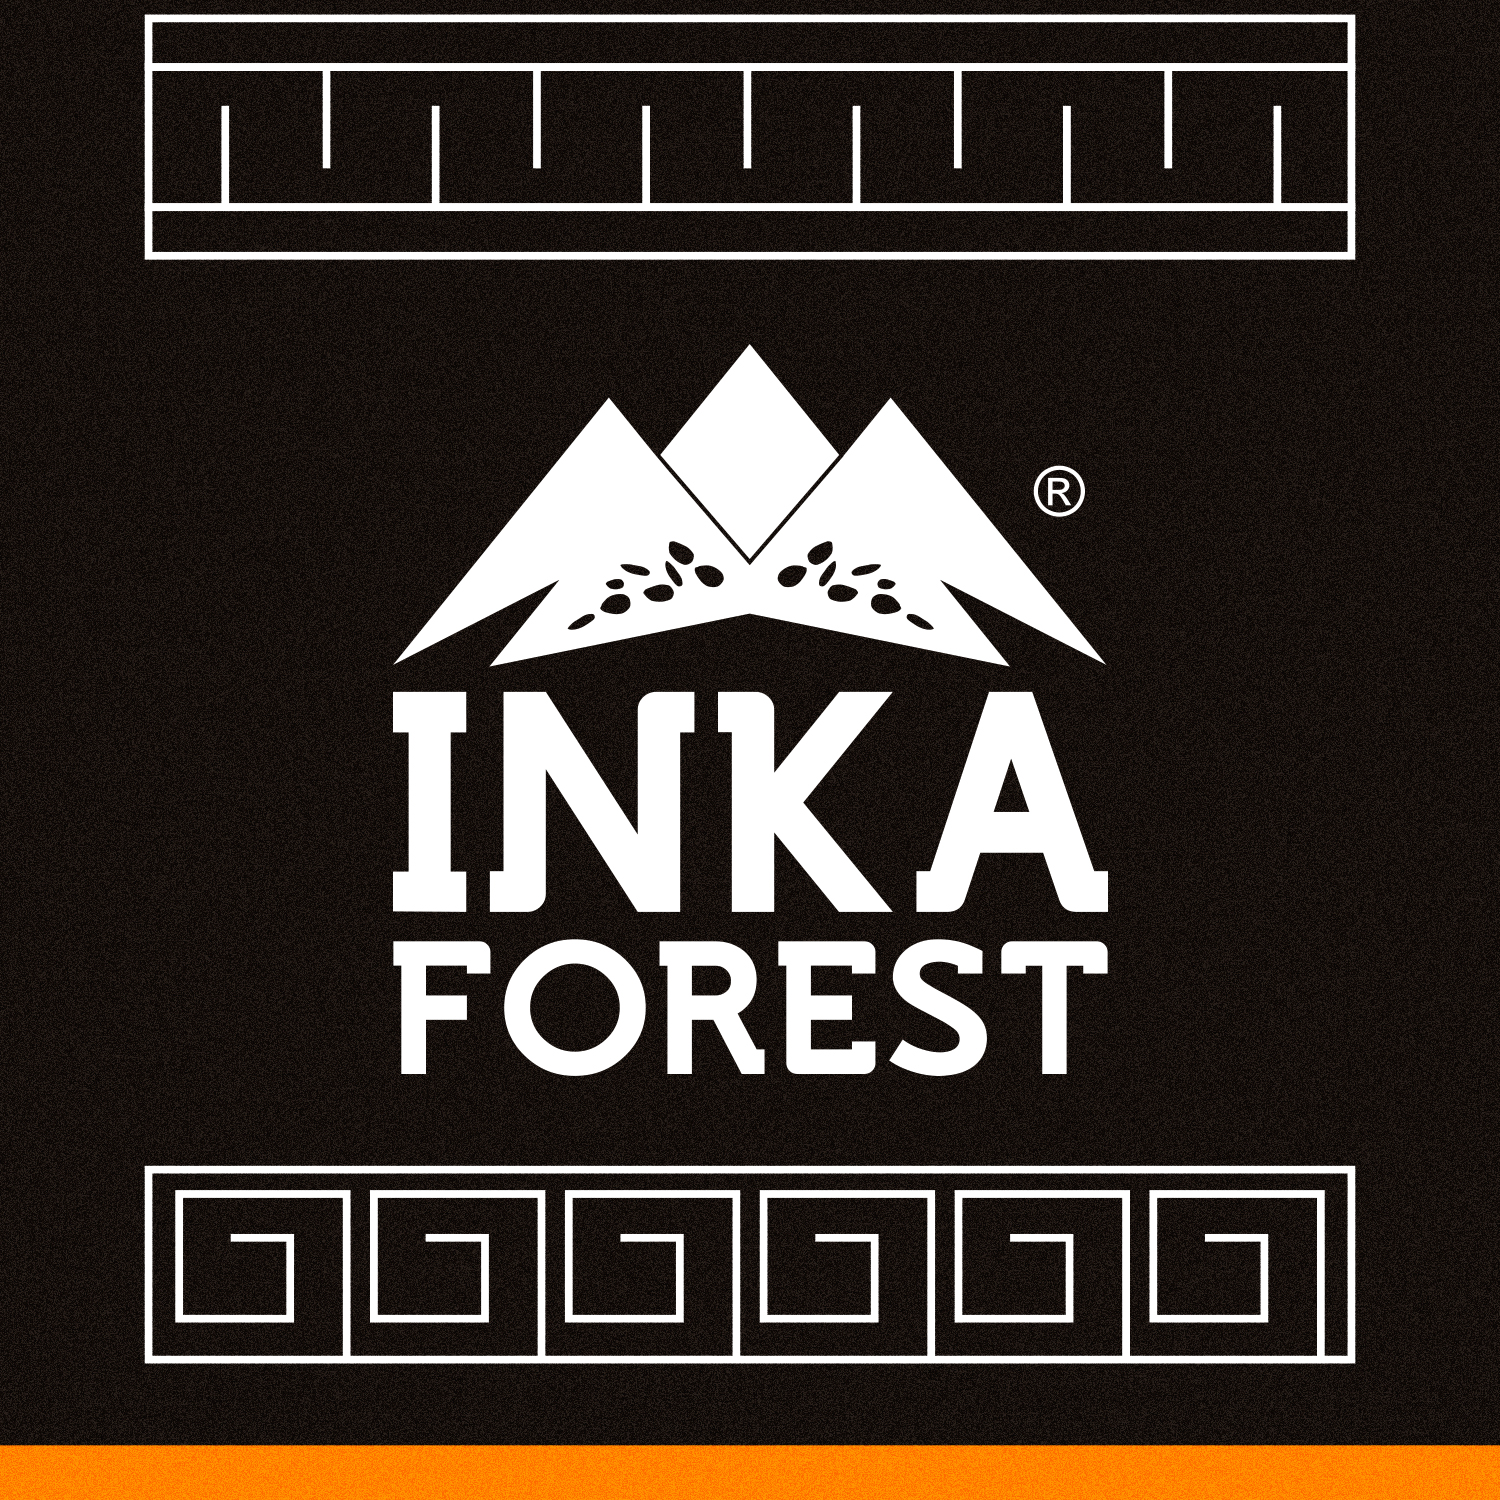 INKA FOREST EXPORT S.A.C.